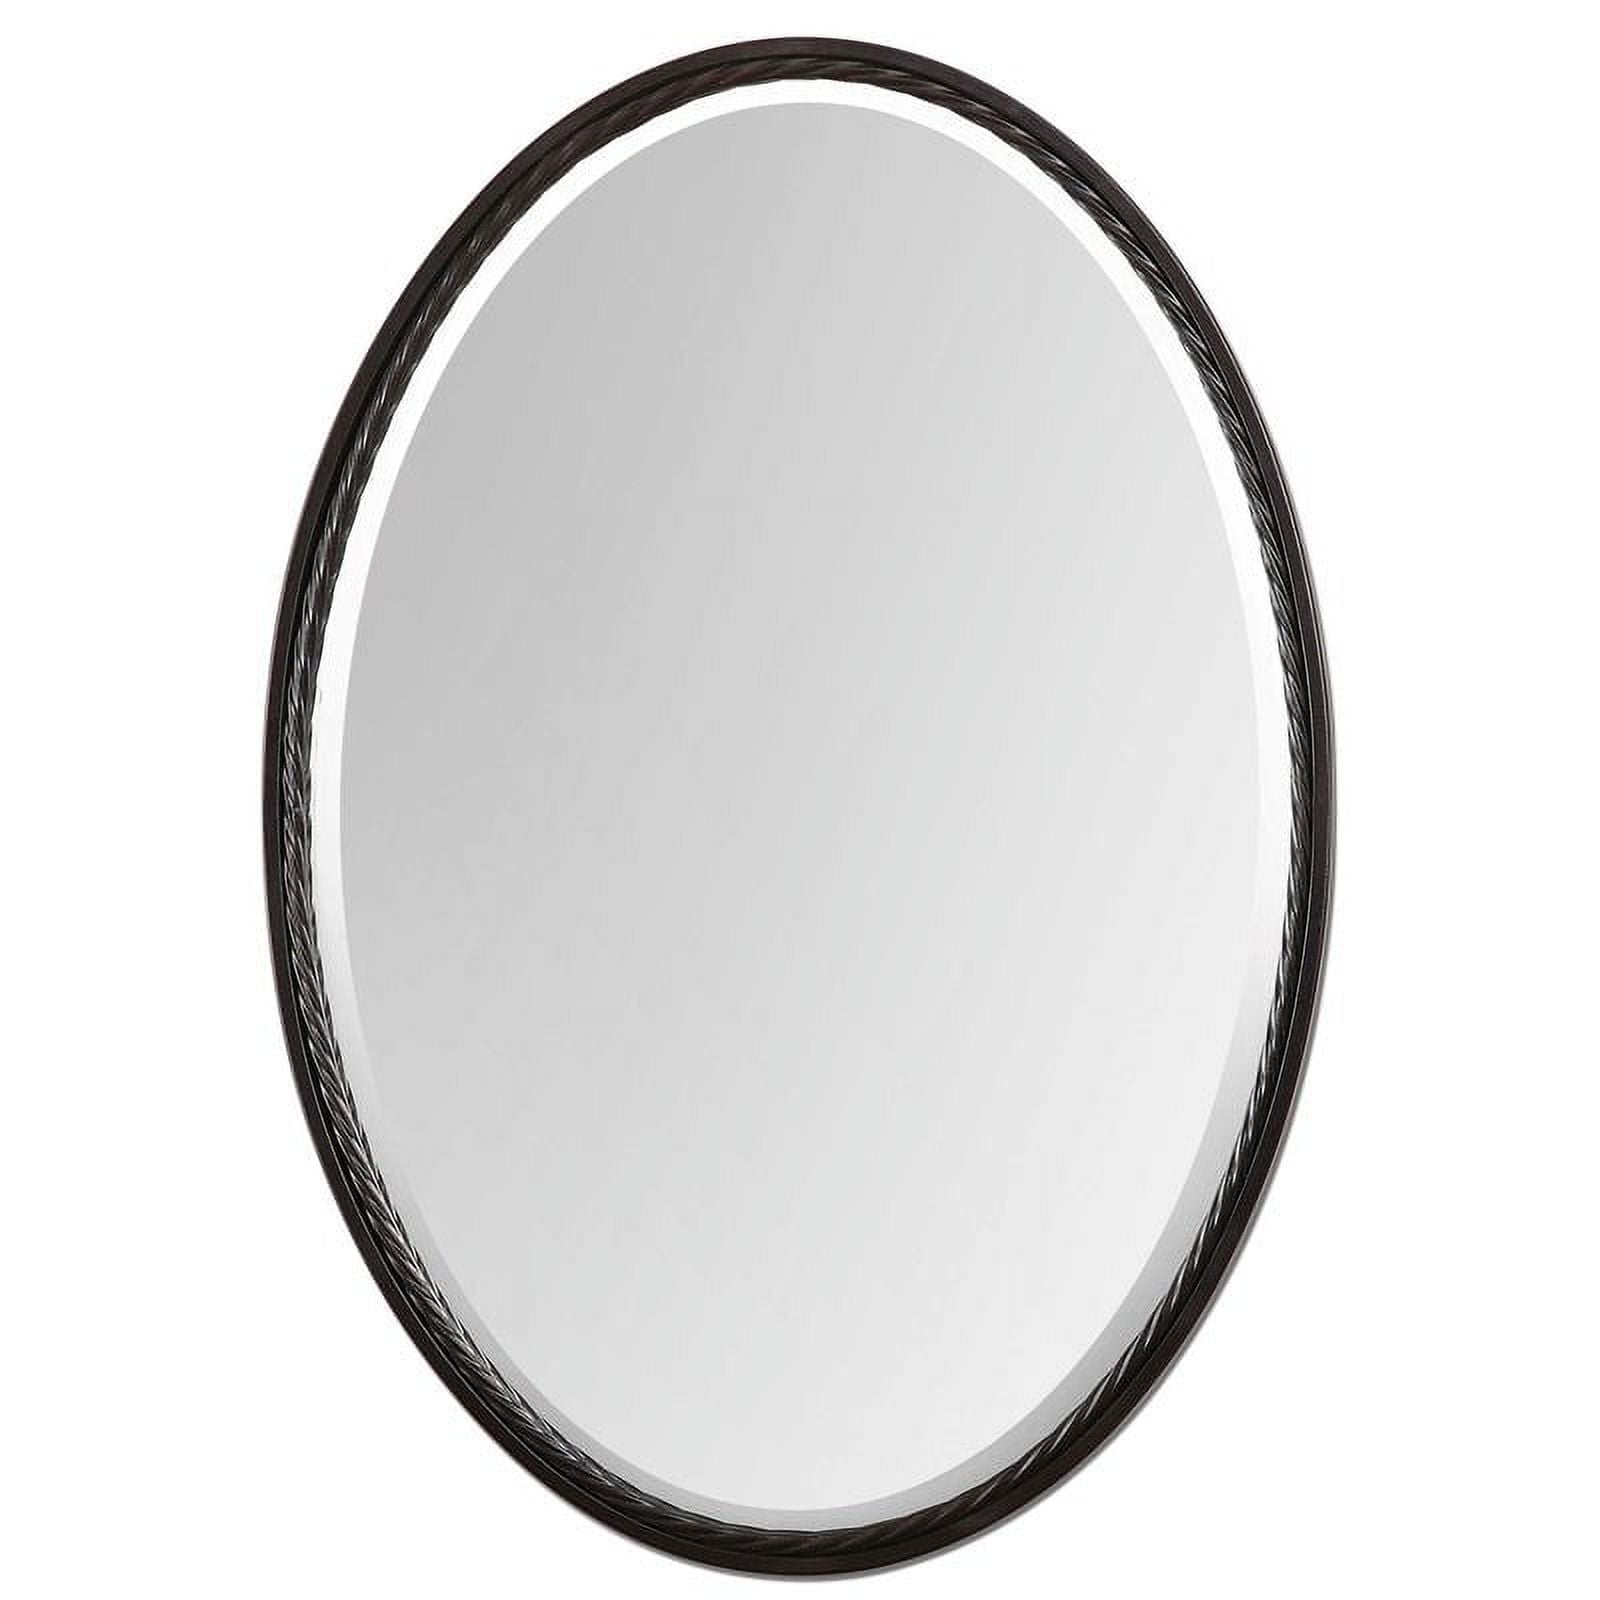 Beaumont Lane Twisted Rope Metal Oval Wall Mirror in Oil Rubbed Bronze 